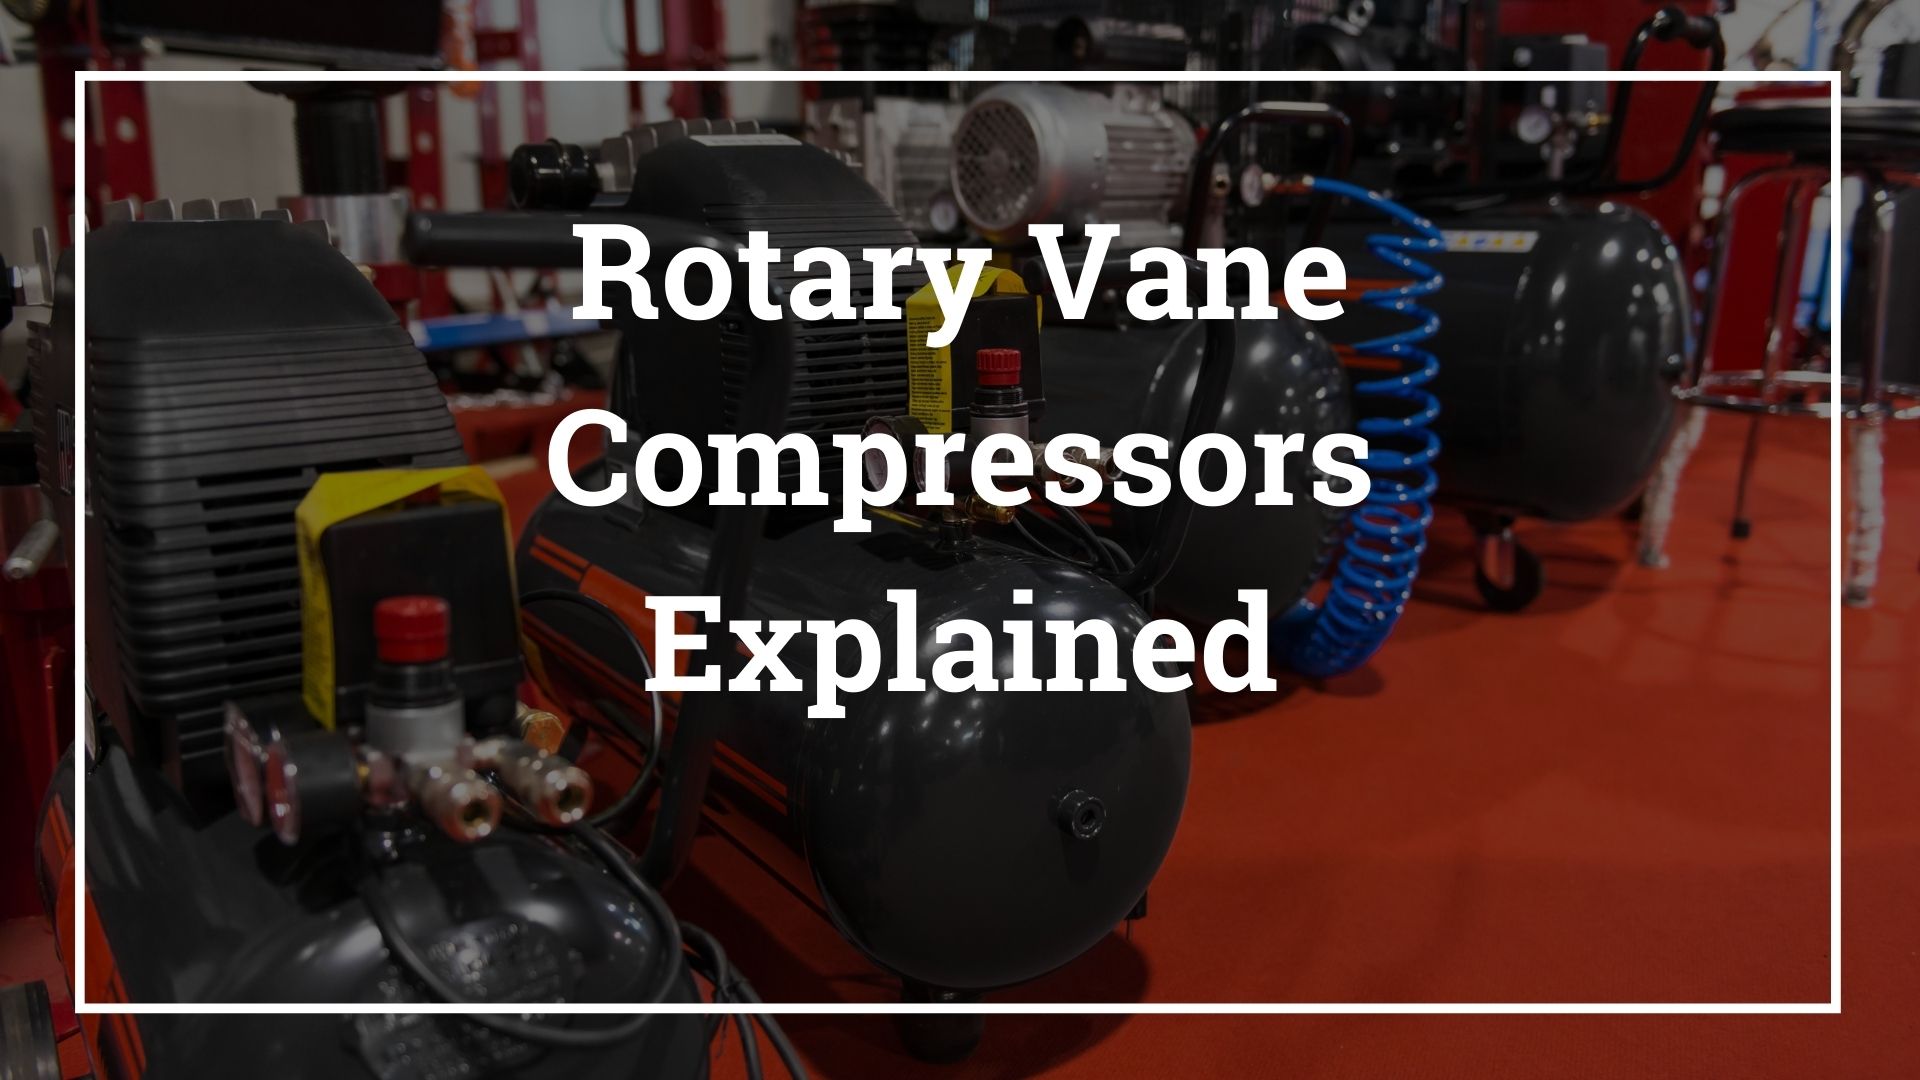 Rotary Vane Compressors Explained | About Air Compressors.com